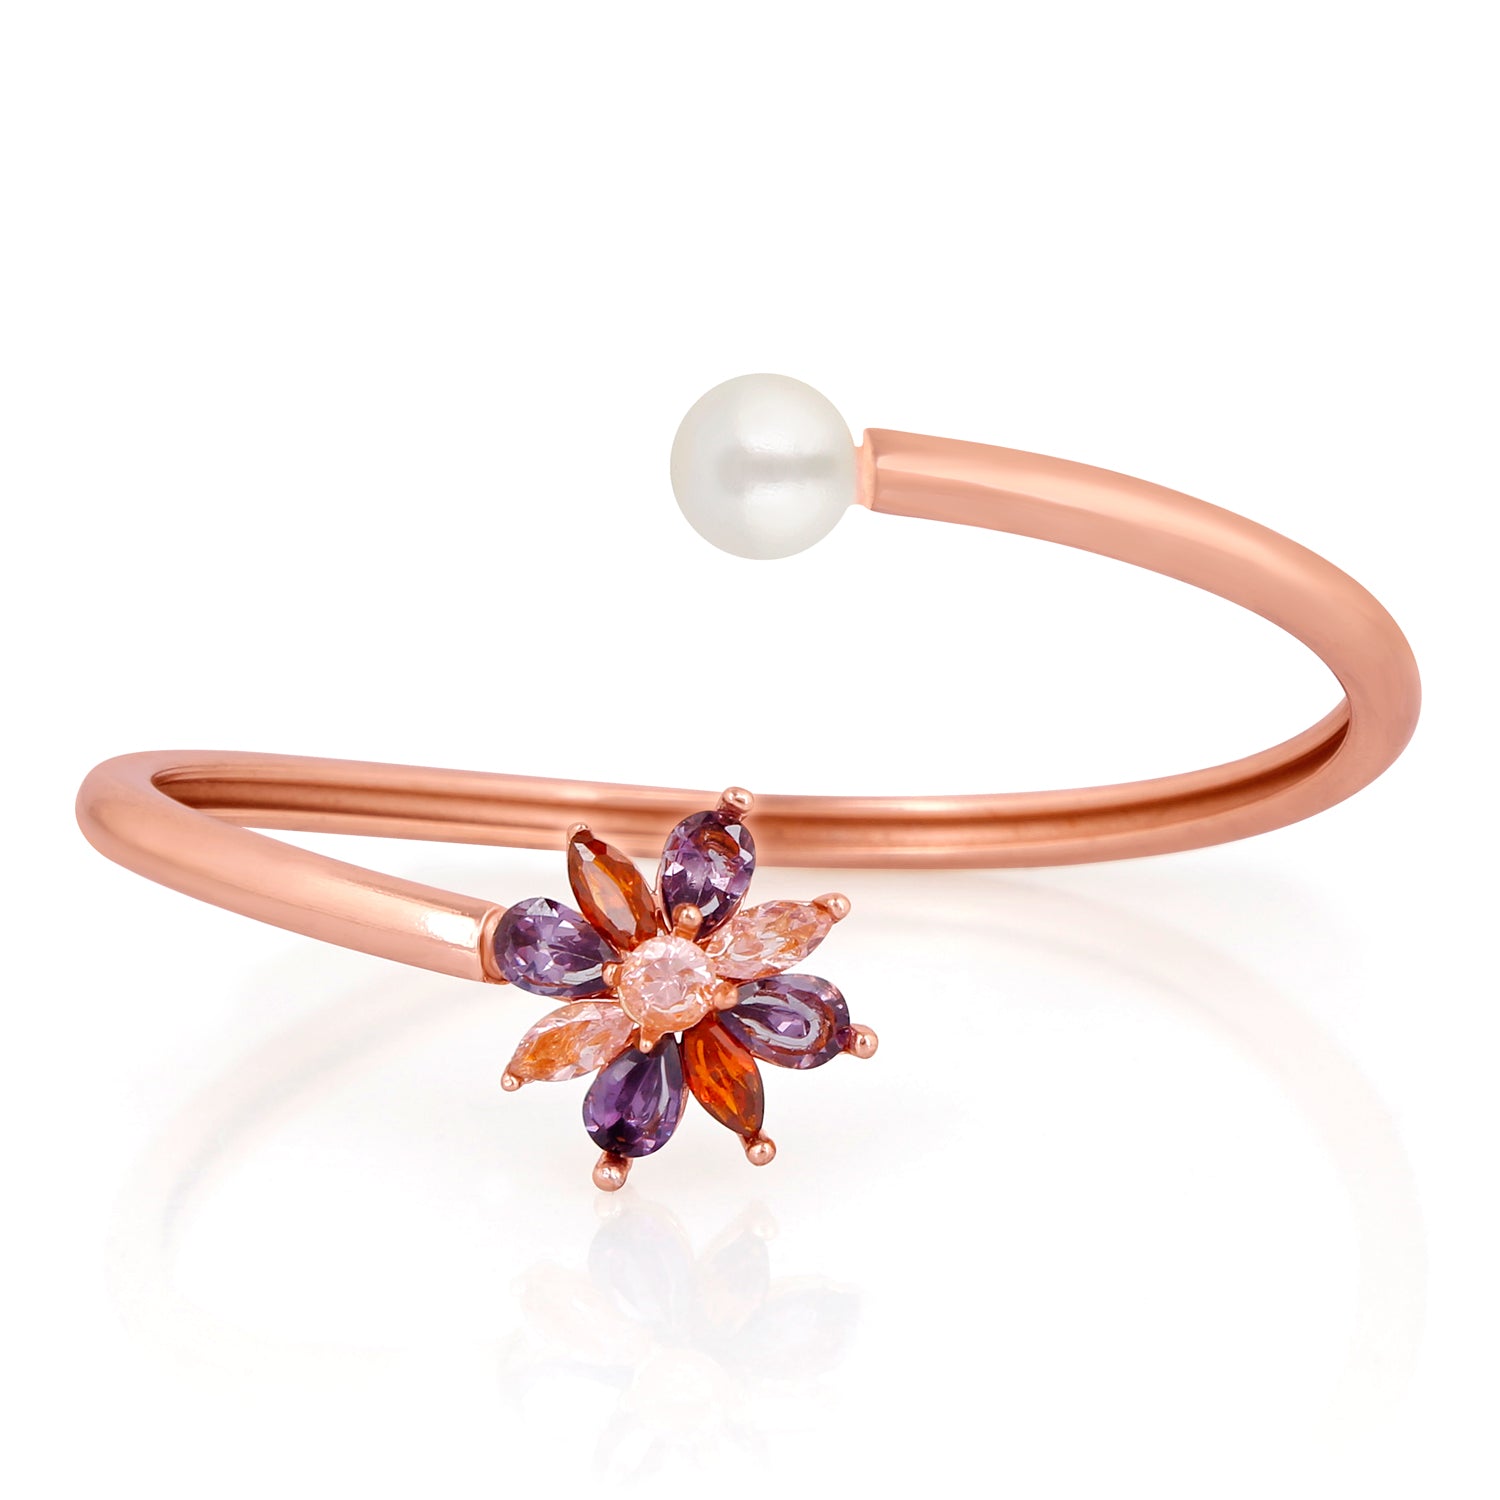 Mahi RoseGold Plated Floral Exclusive Adjustable Bracelet with Cubic Zirconia stones